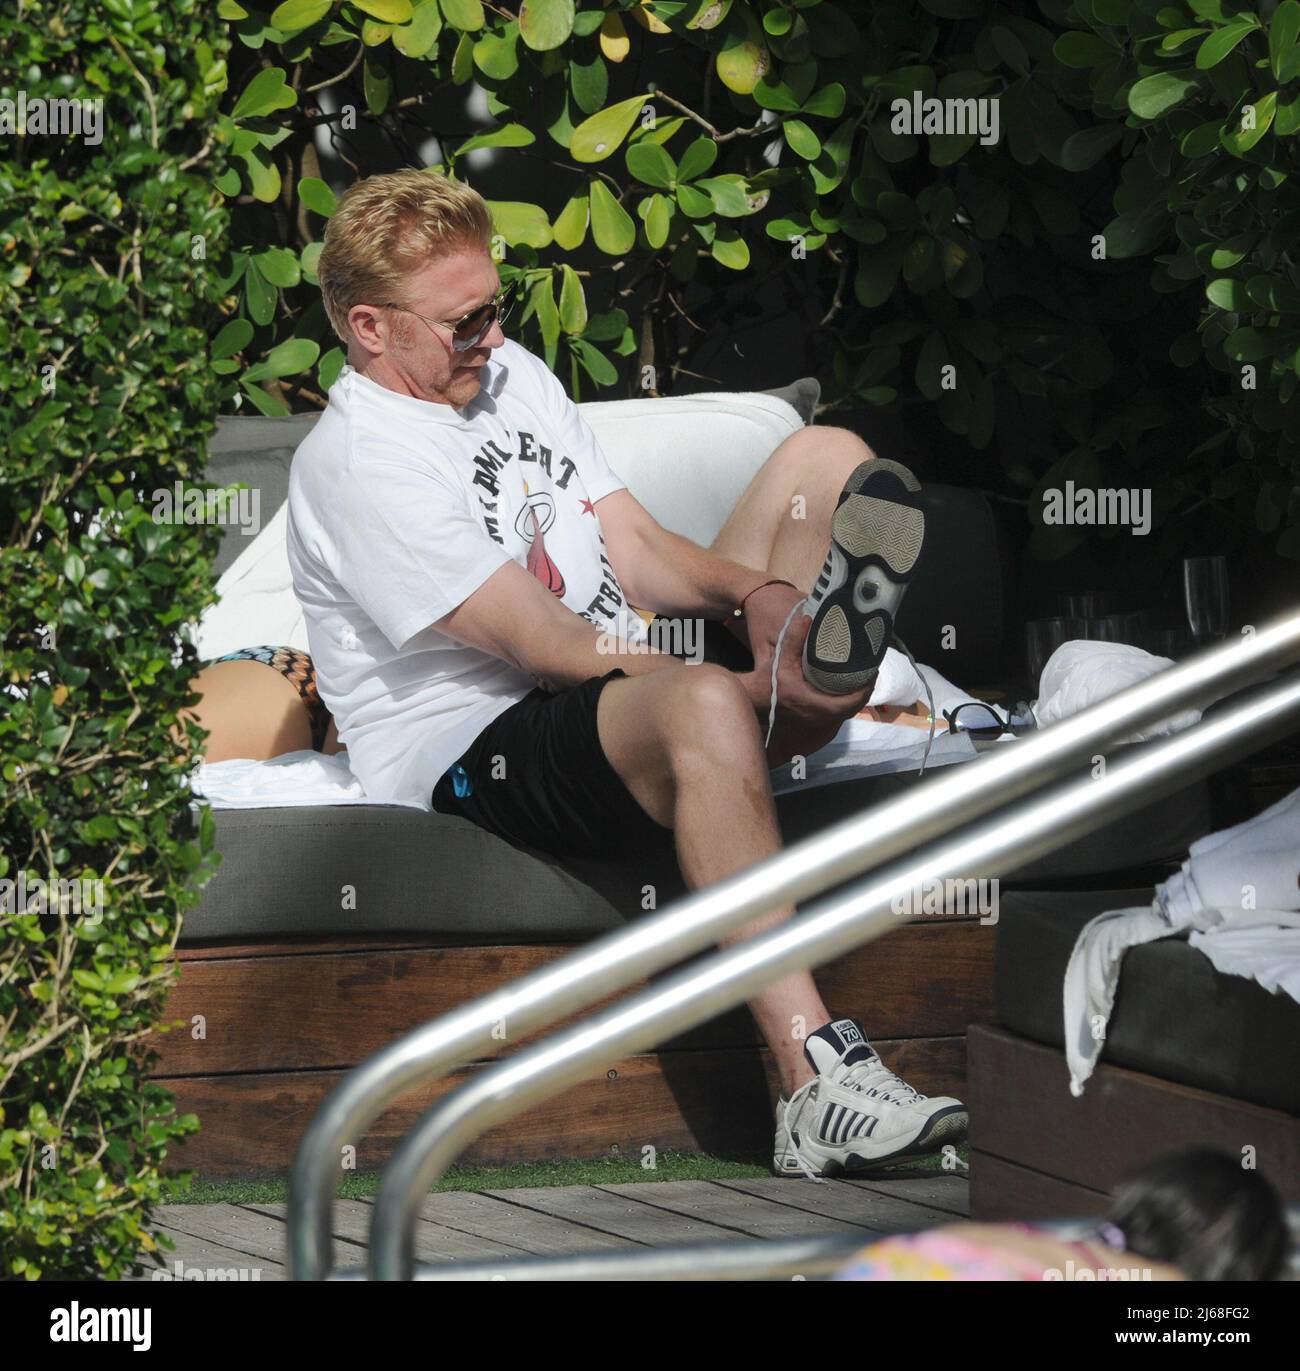 MIAMI BEACH, FL - DECEMBER 21: Tennis great Boris Becker ( AKA Boris Franz Becker)  along with his Wife Sharlely ÔLillyÕ Kerssenberg (model, m. Jun-2009, one son). The former tennis player was spotted relaxing at a hotel in Florida while his wife Sharlely ÔLillyÕ Kerssenberg soaked up the sunshine in a tiny two-piece at their South Beach Hotel.  on December 21, 2011 in Miami Beach, Florida    People:  Boris Becker Sharlely Kerssenberg Stock Photo